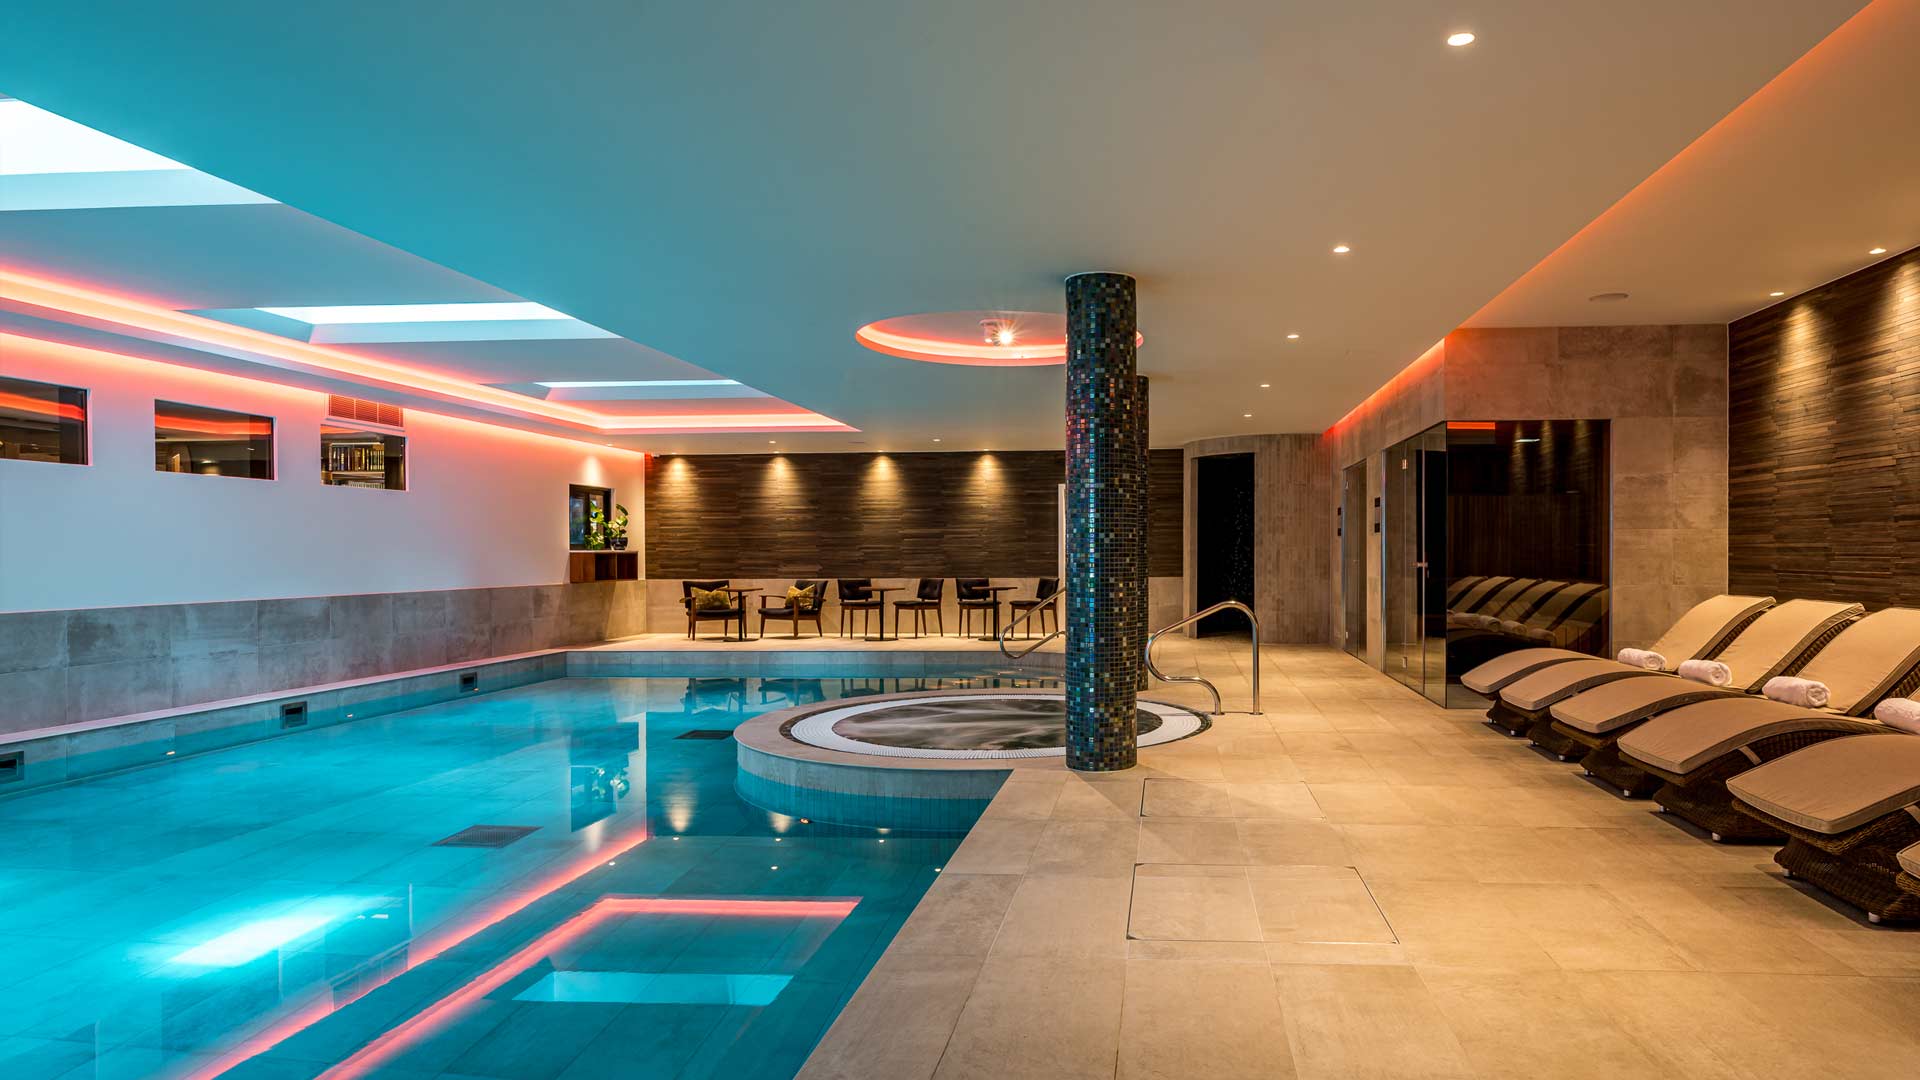 Modern swimming pool and spa area with jacuzzi and sauna.